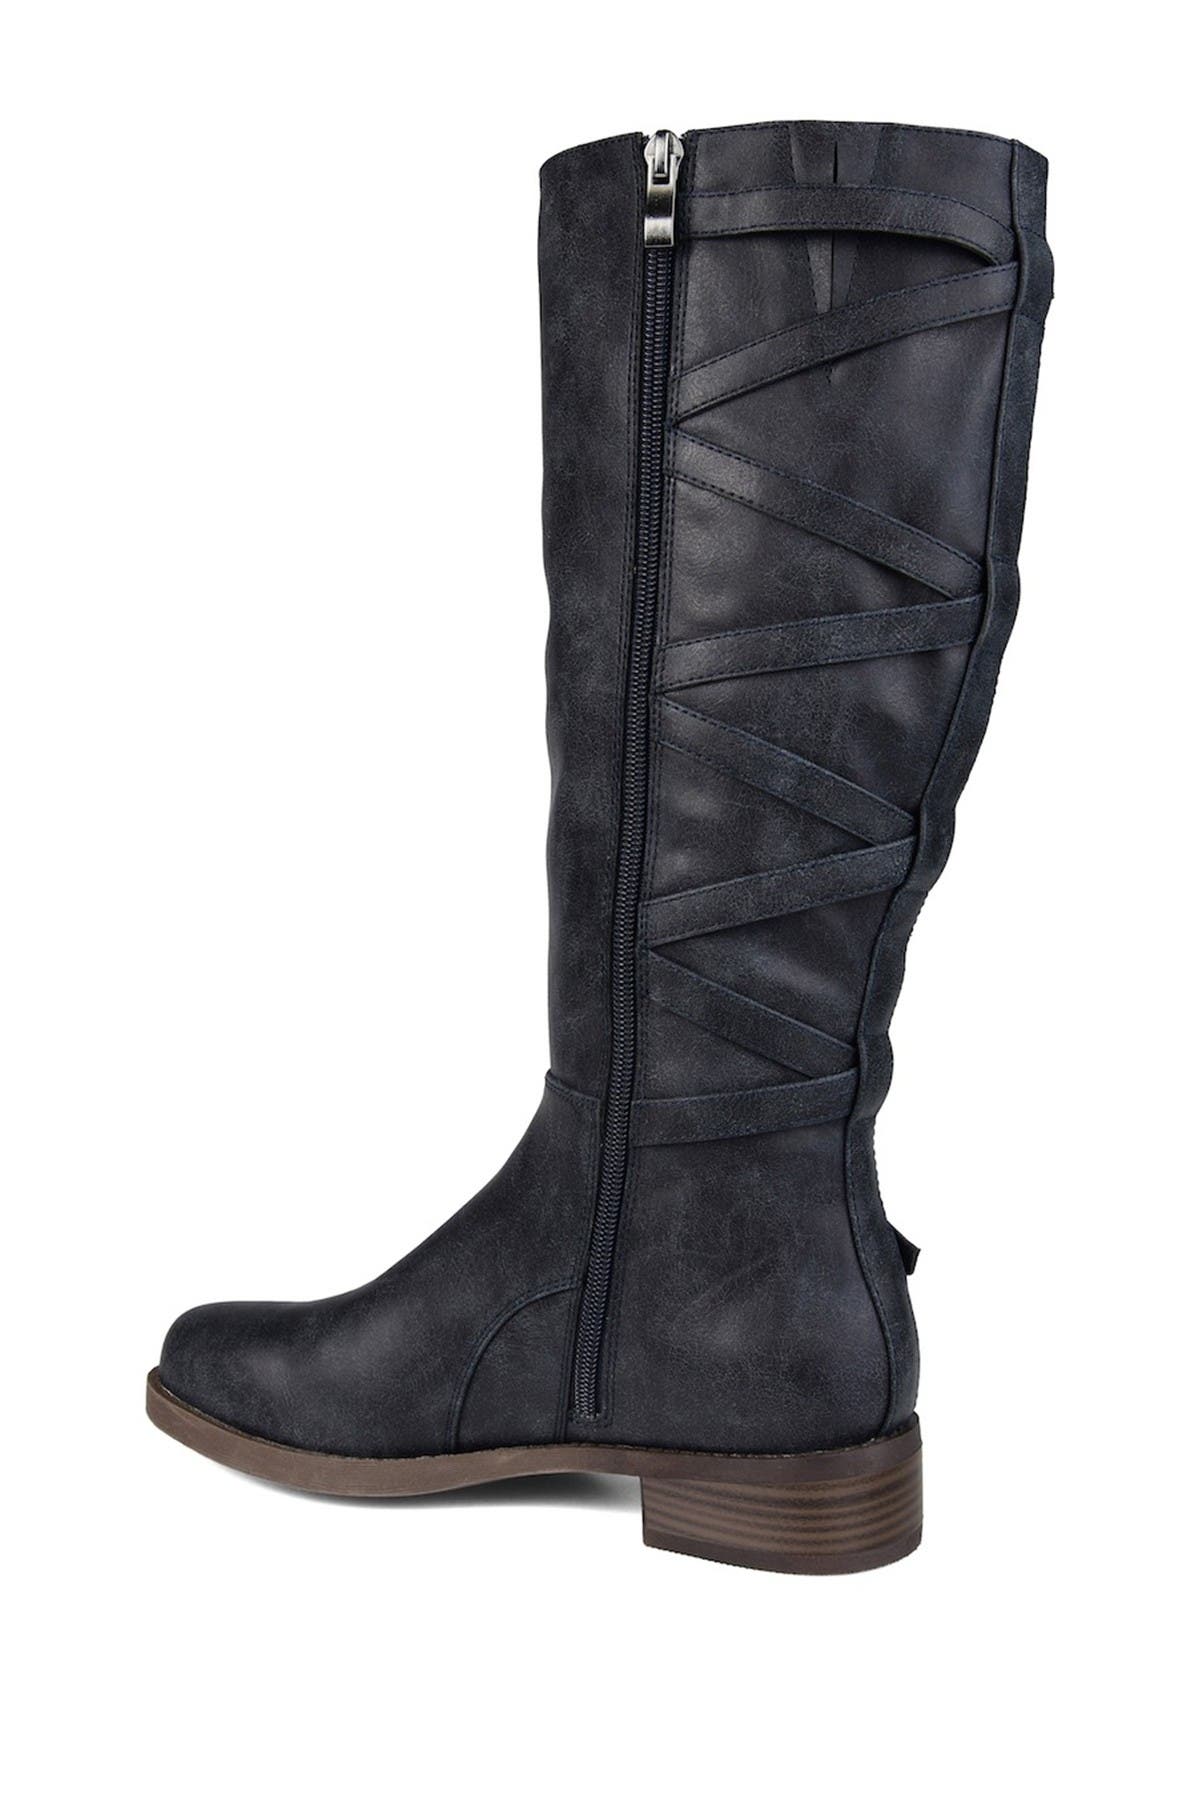 Journee Collection Carly Lace Back Tall Boot In Navy2